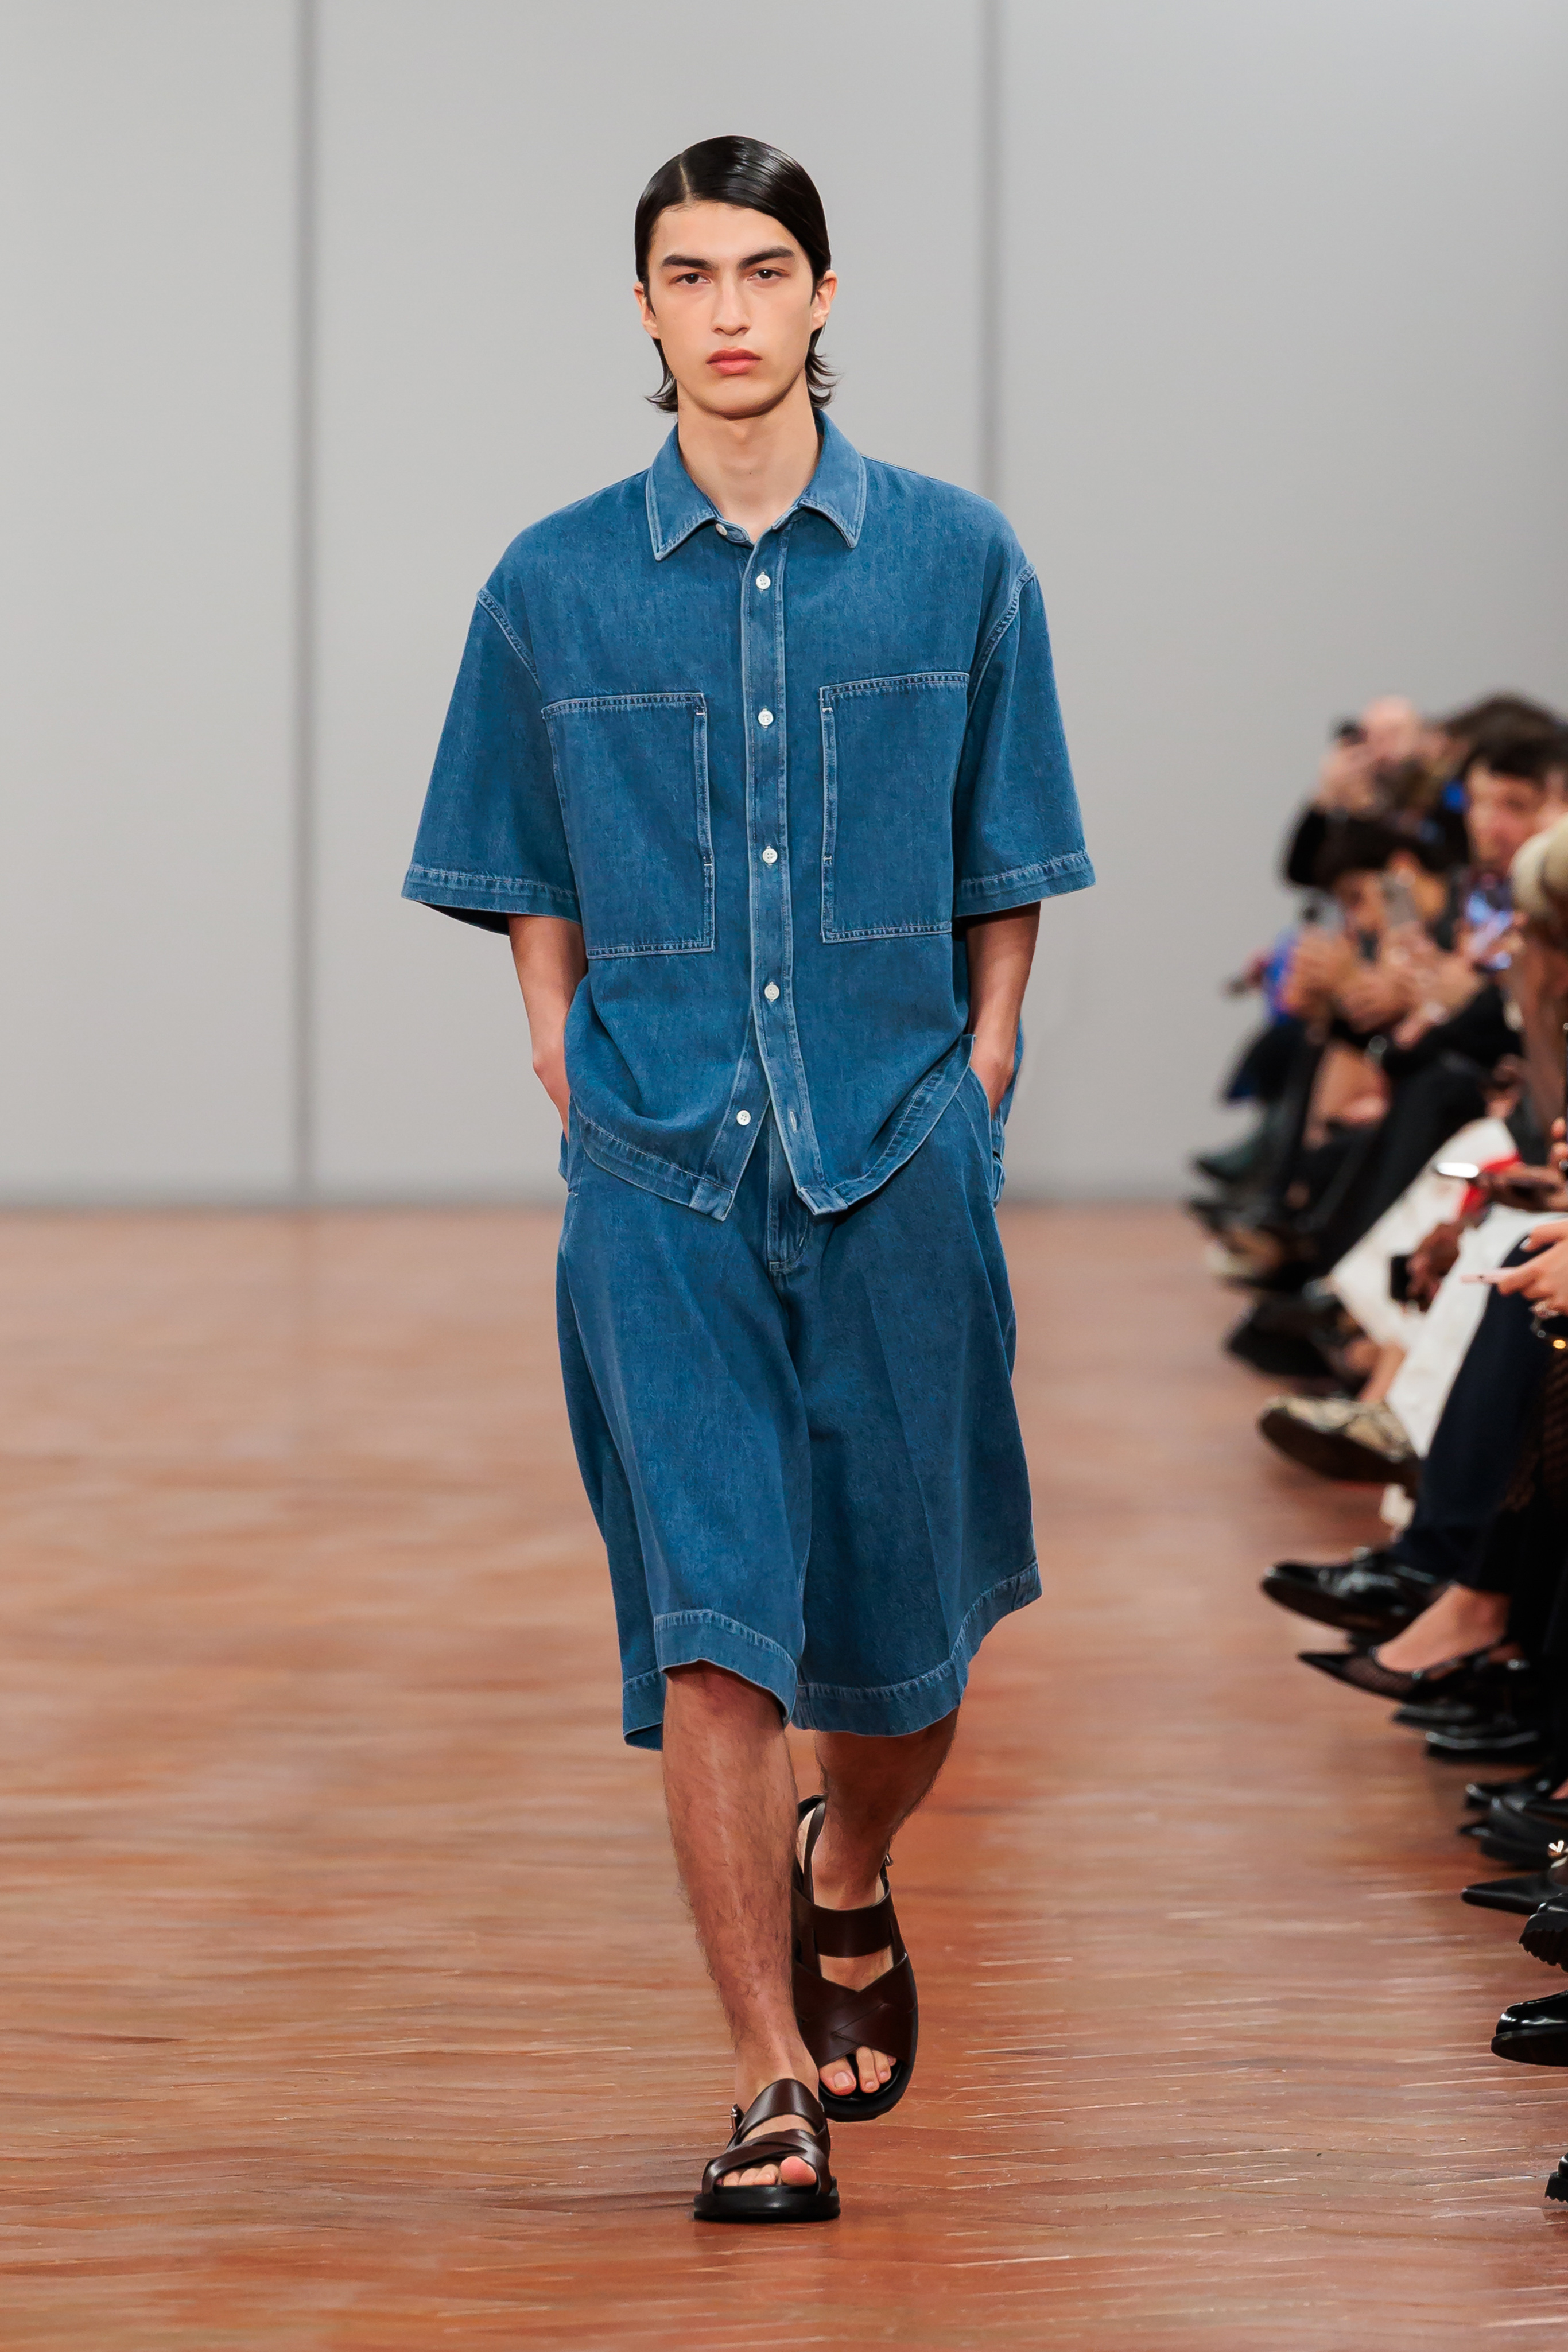 Model on runway wearing oversized denim shirt, matching knee-length shorts, and black sandals. Hands in pockets, stoic expression